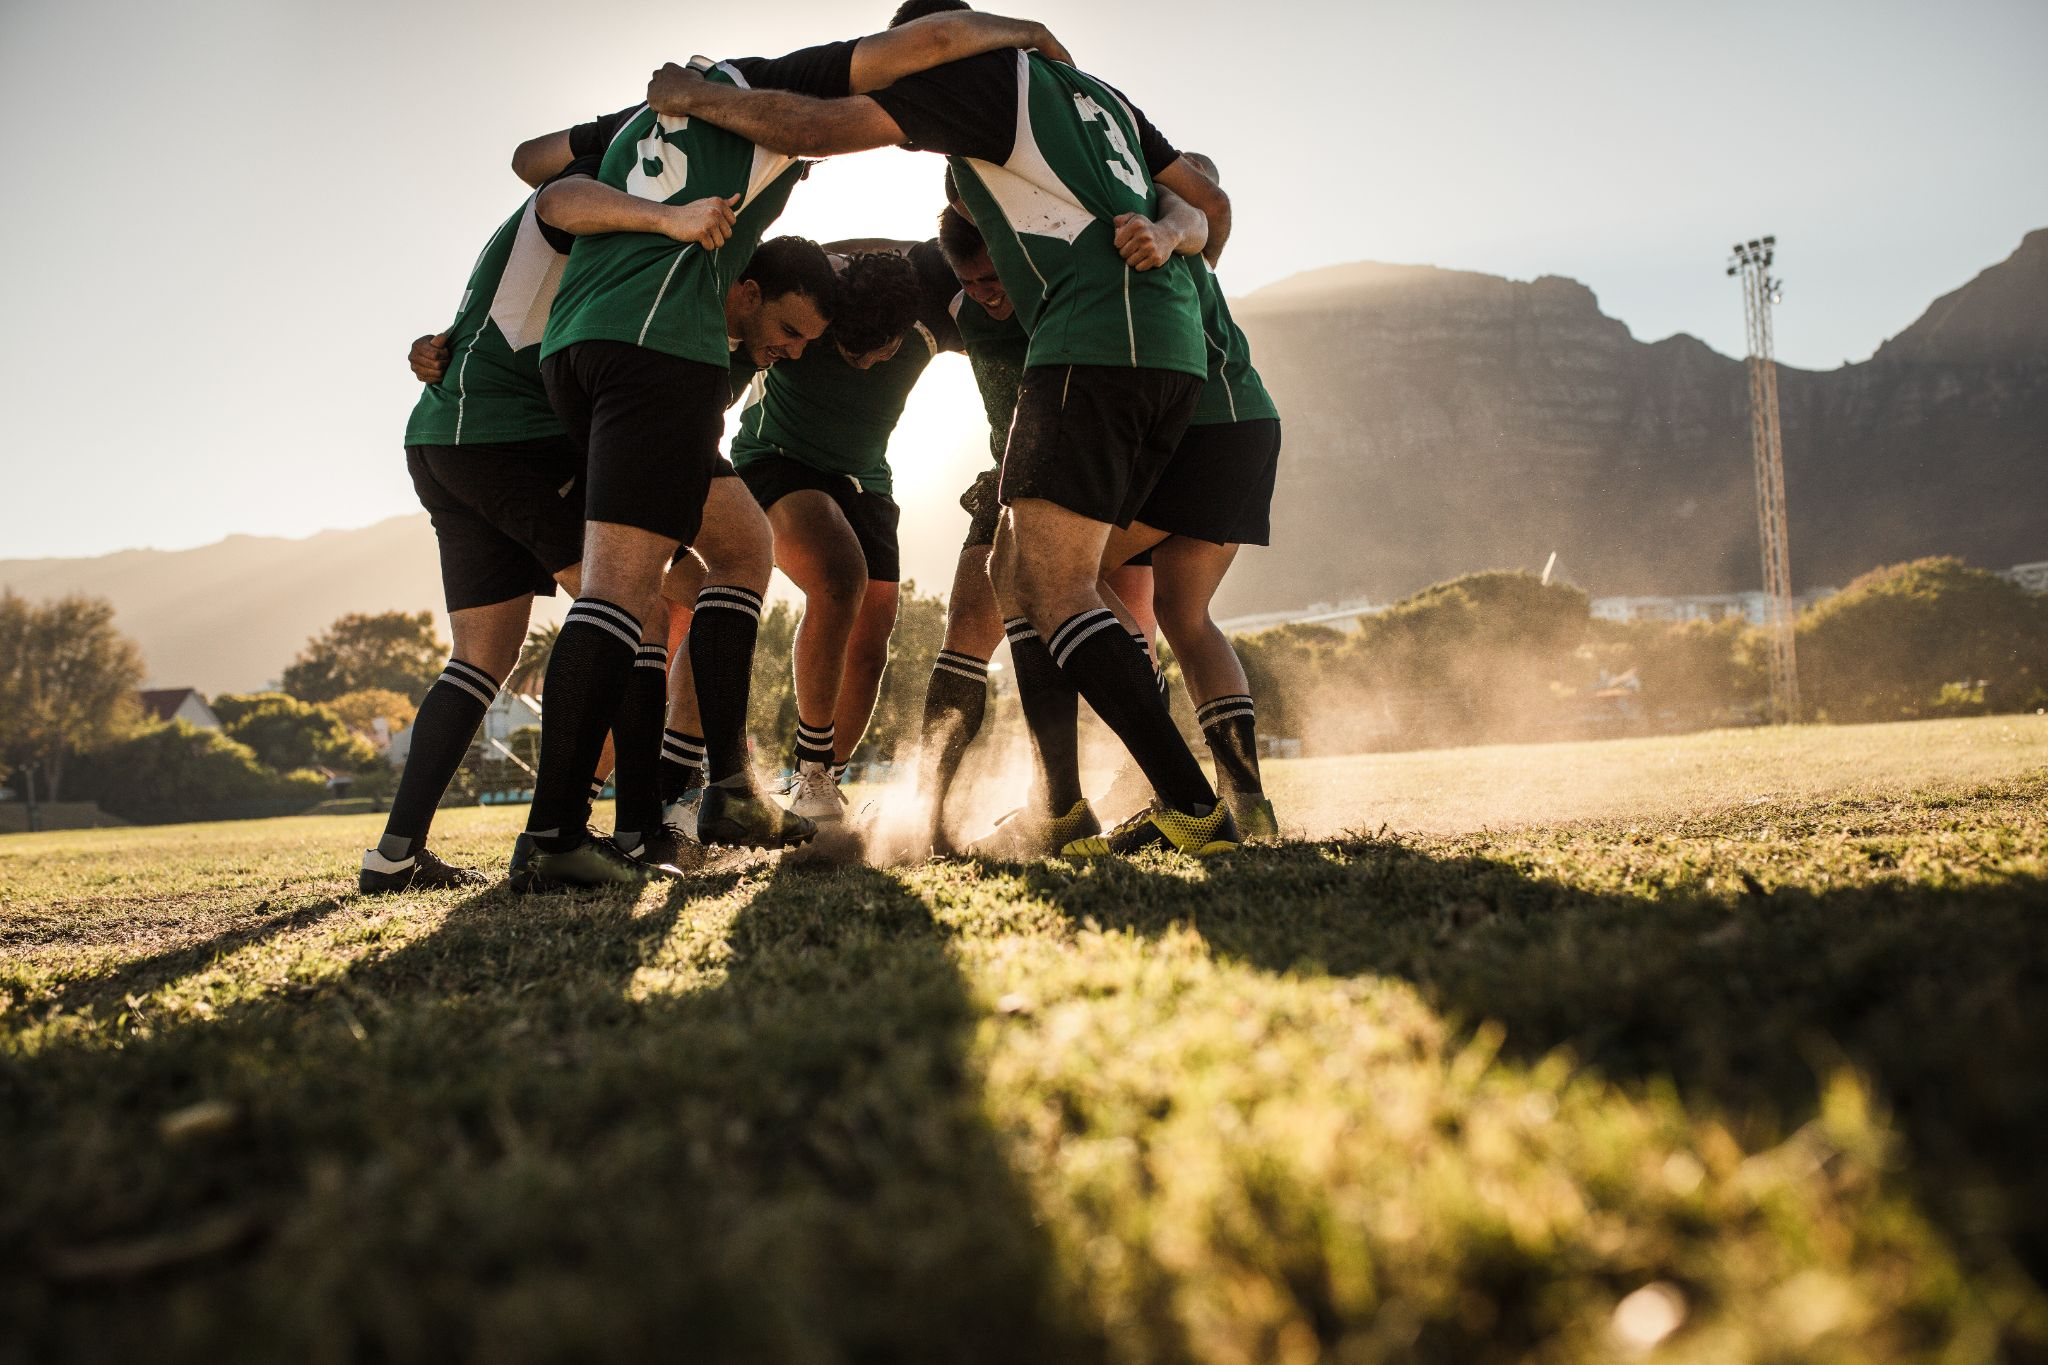 Rugby players in a huddle